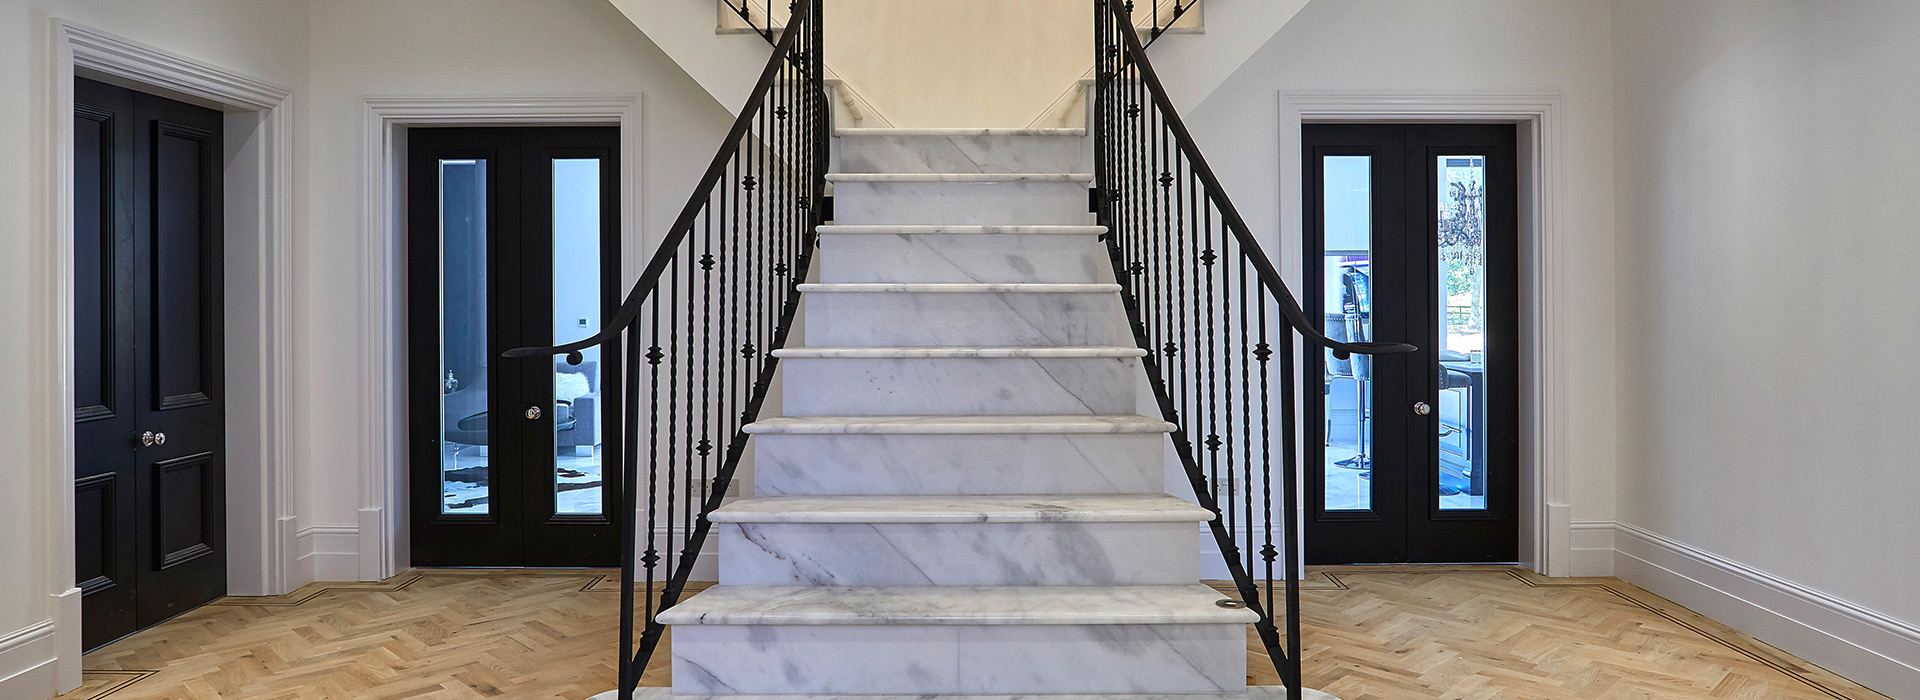 Marble staircase with oak parquet hallway flooring